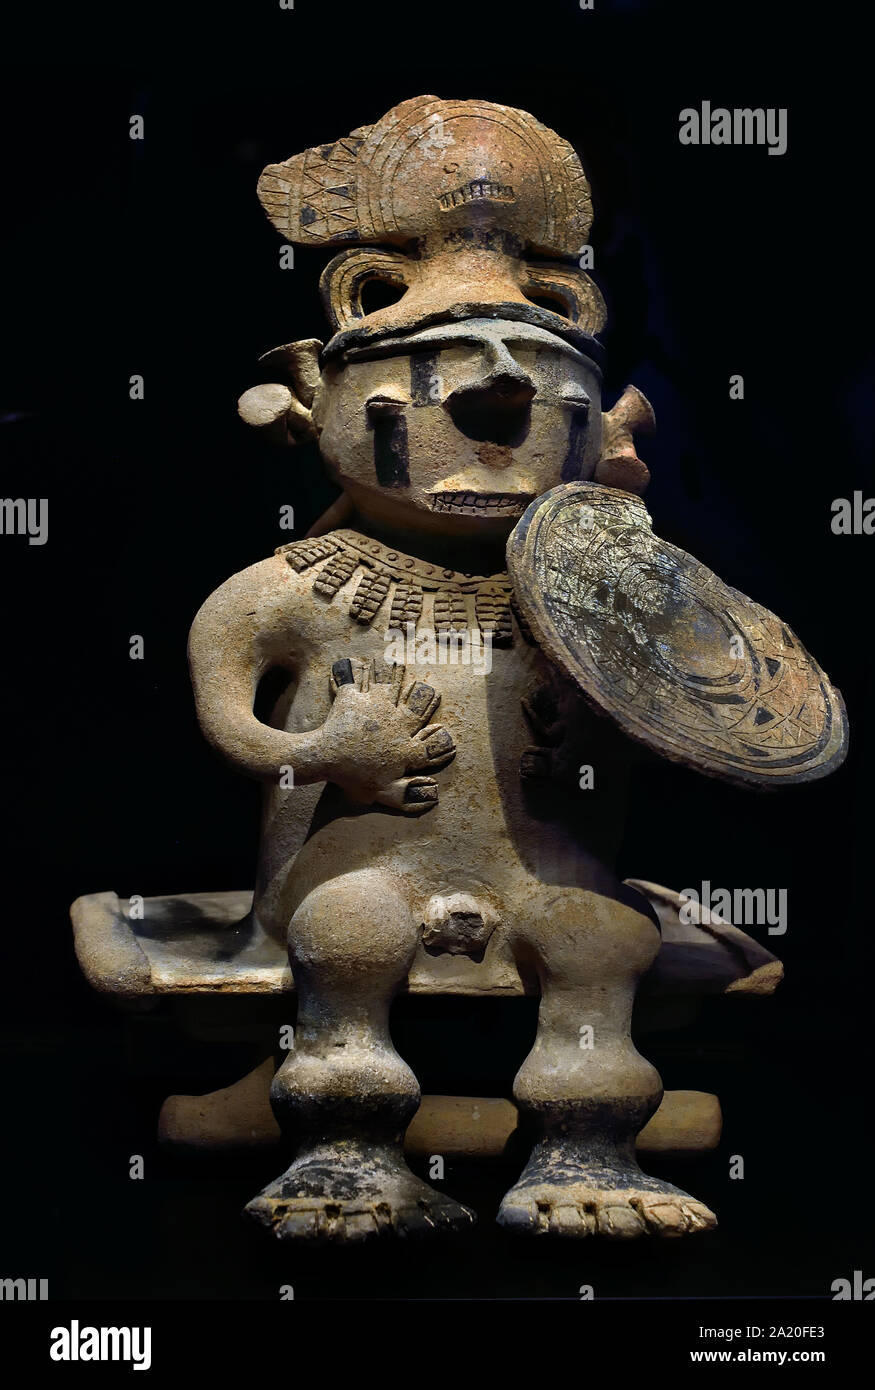 Statuette of warrior sitting on a bench 1000 - 1600 Culture Cauca - Colombia - America - South America ( The warriors of this region painted their bodies to protect themselves from enemies or to inspire terror. ) Stock Photo